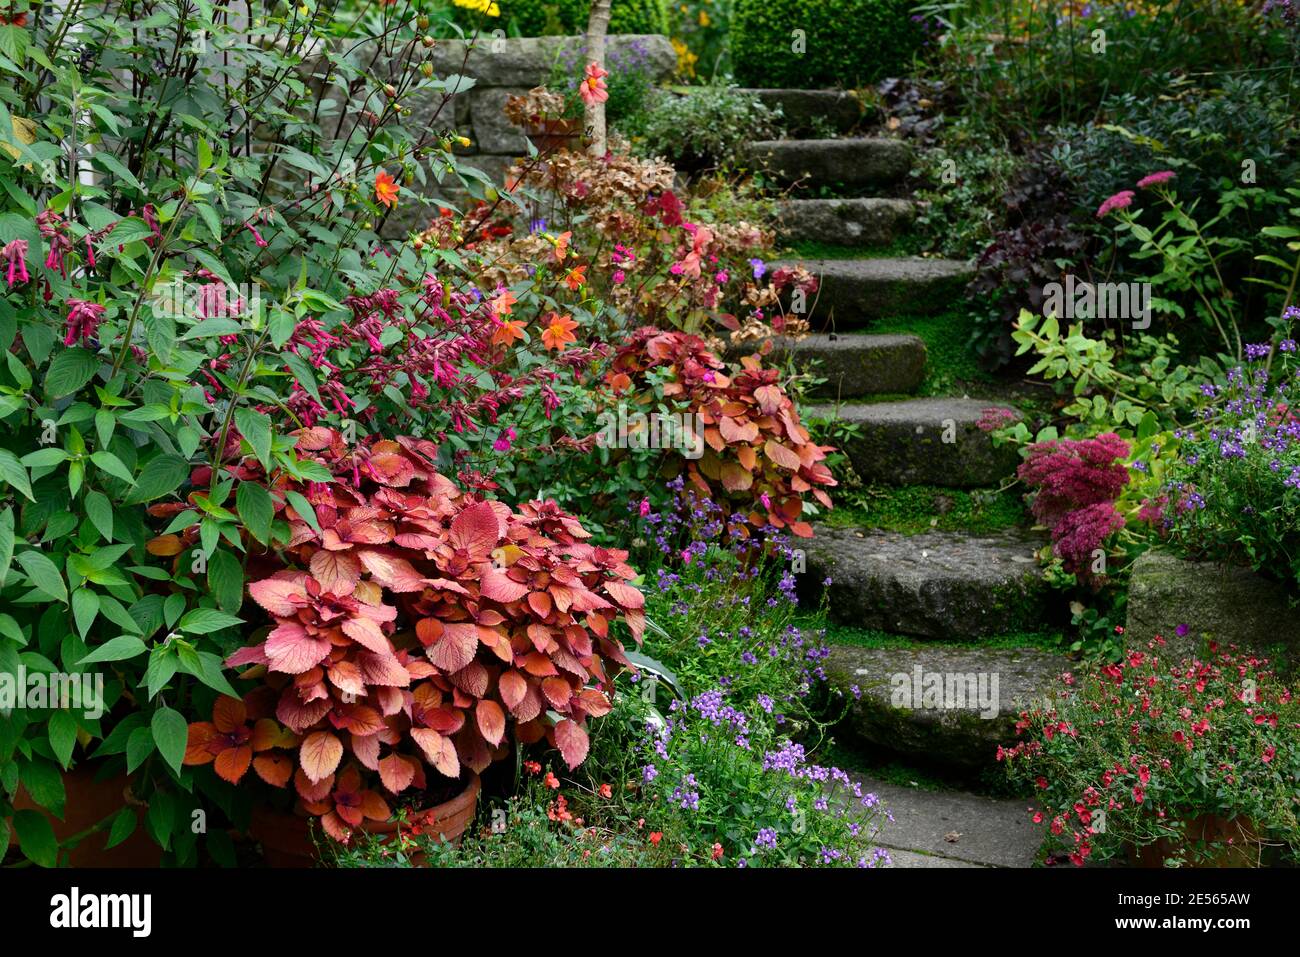 Coleus Campfire,Solenostemon scutellarioides Campfire,dahlia,salvia love and wishes,flowers,steps,path,orange,rust,leaves,foliage,pots,containers,terr Stock Photo